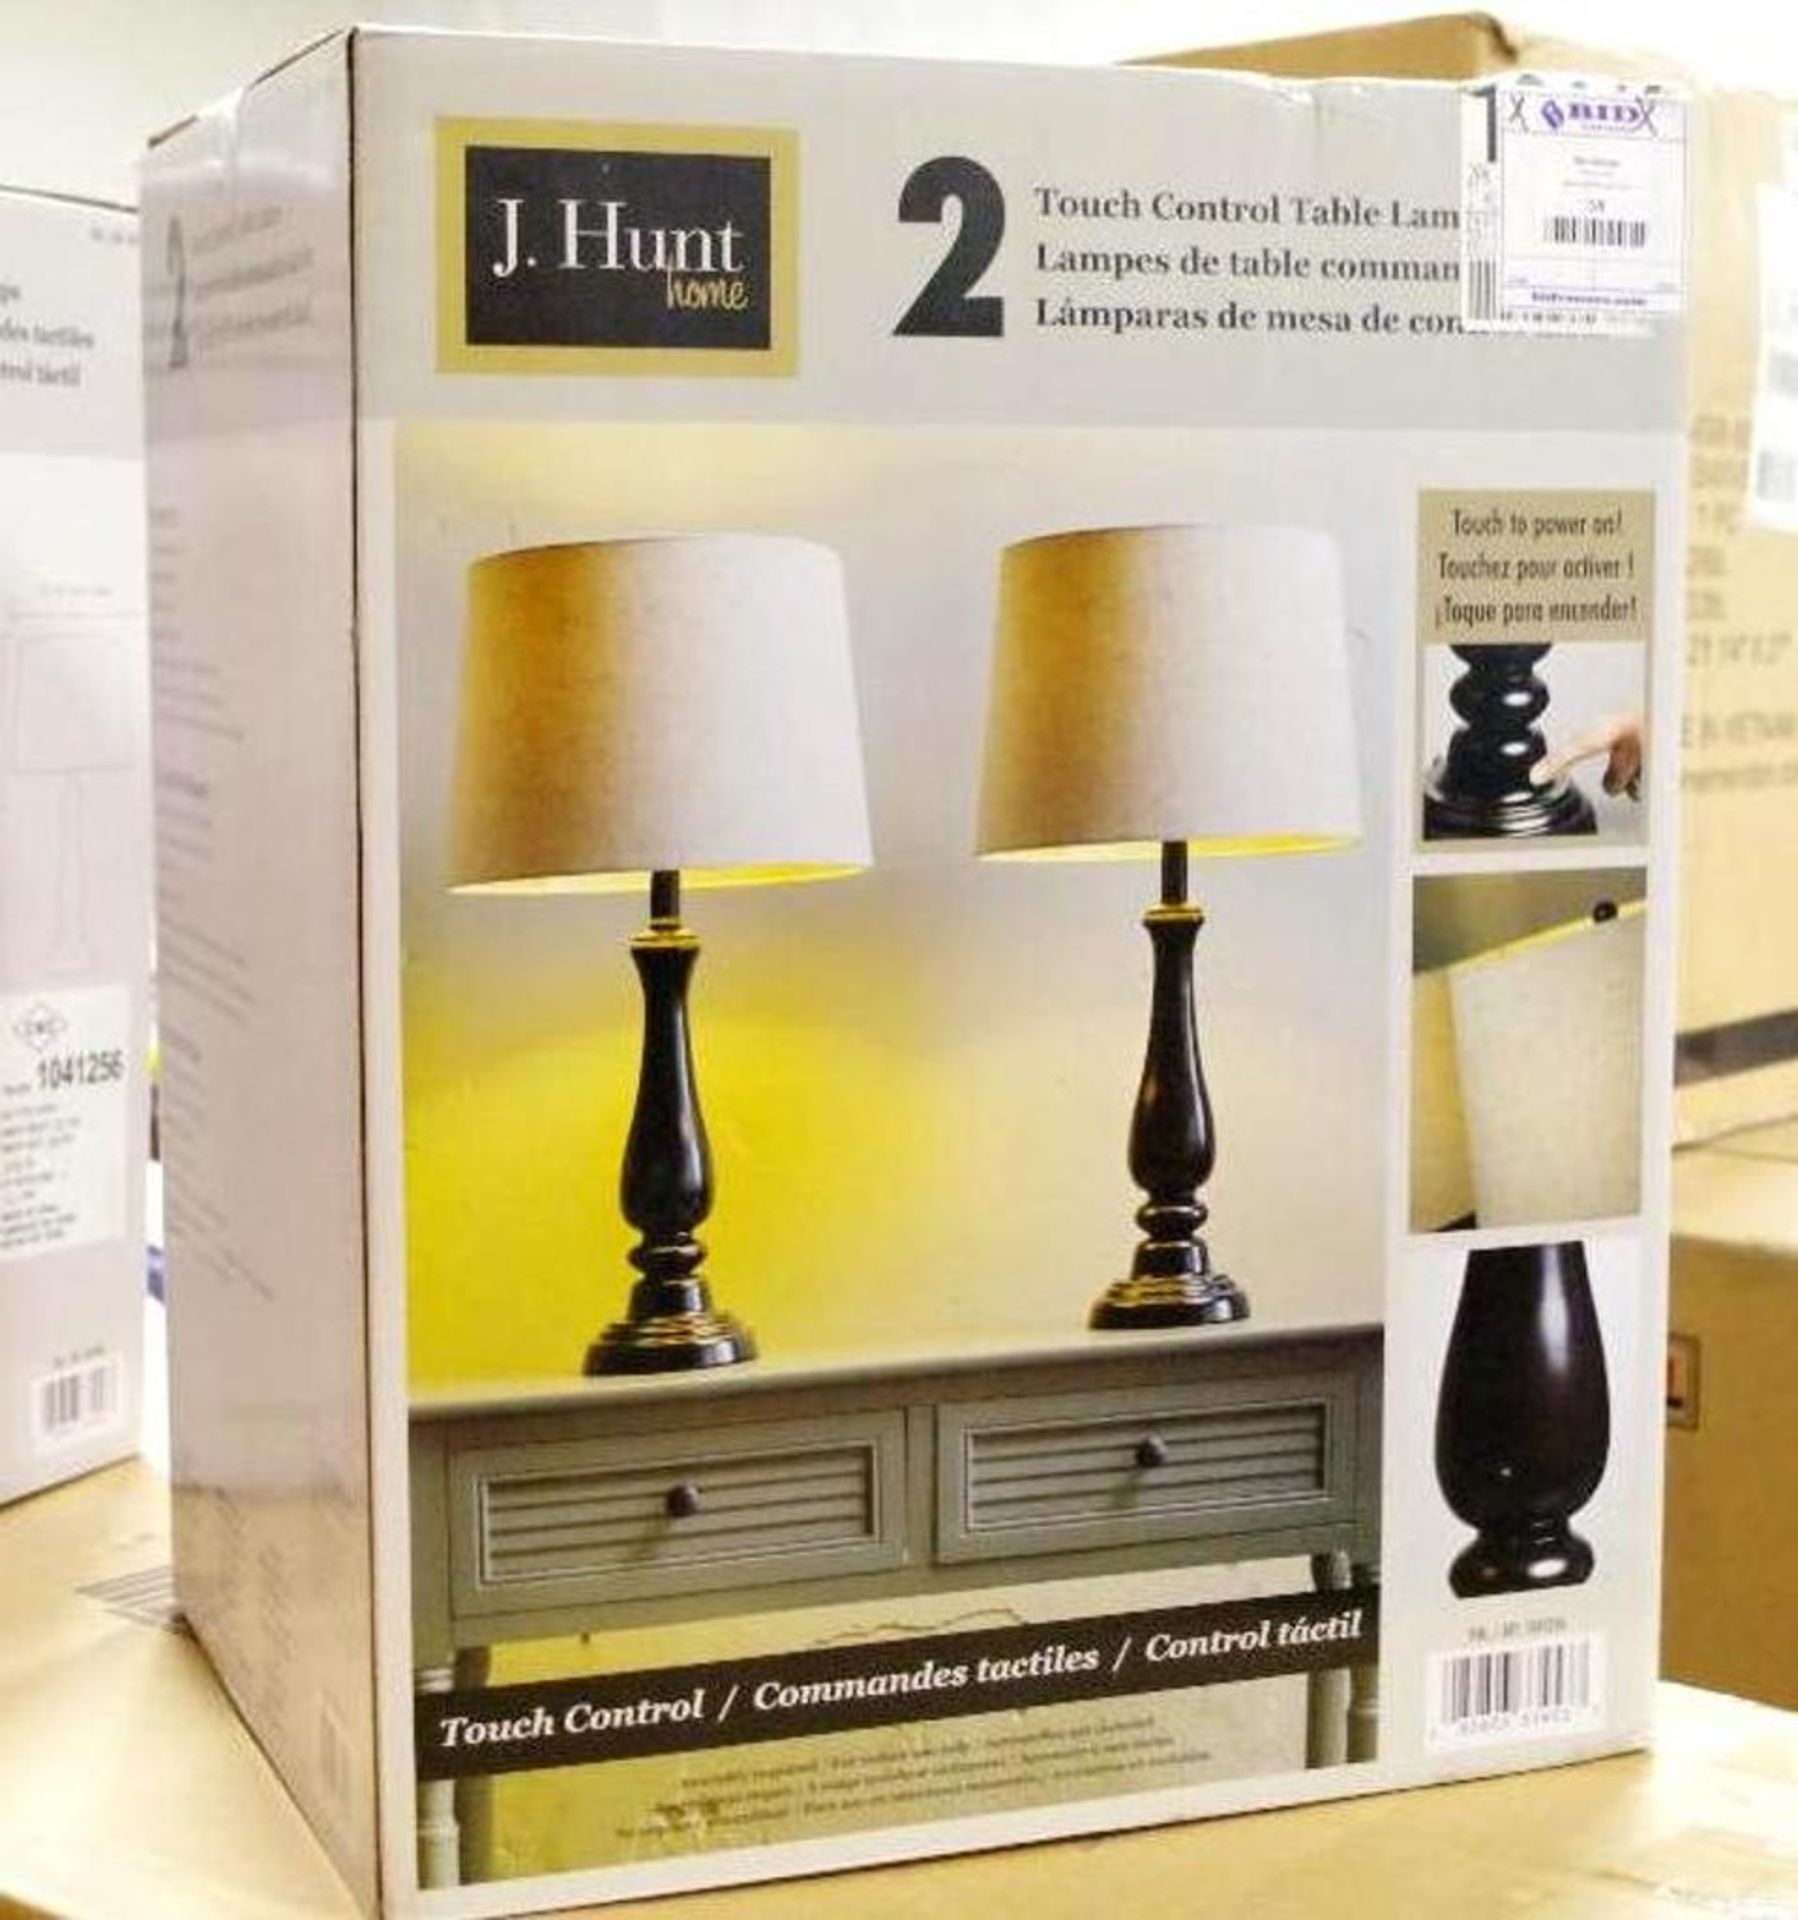 [2] NEW J. HUNT Touch Control Table Lamps (1 Box of 2)